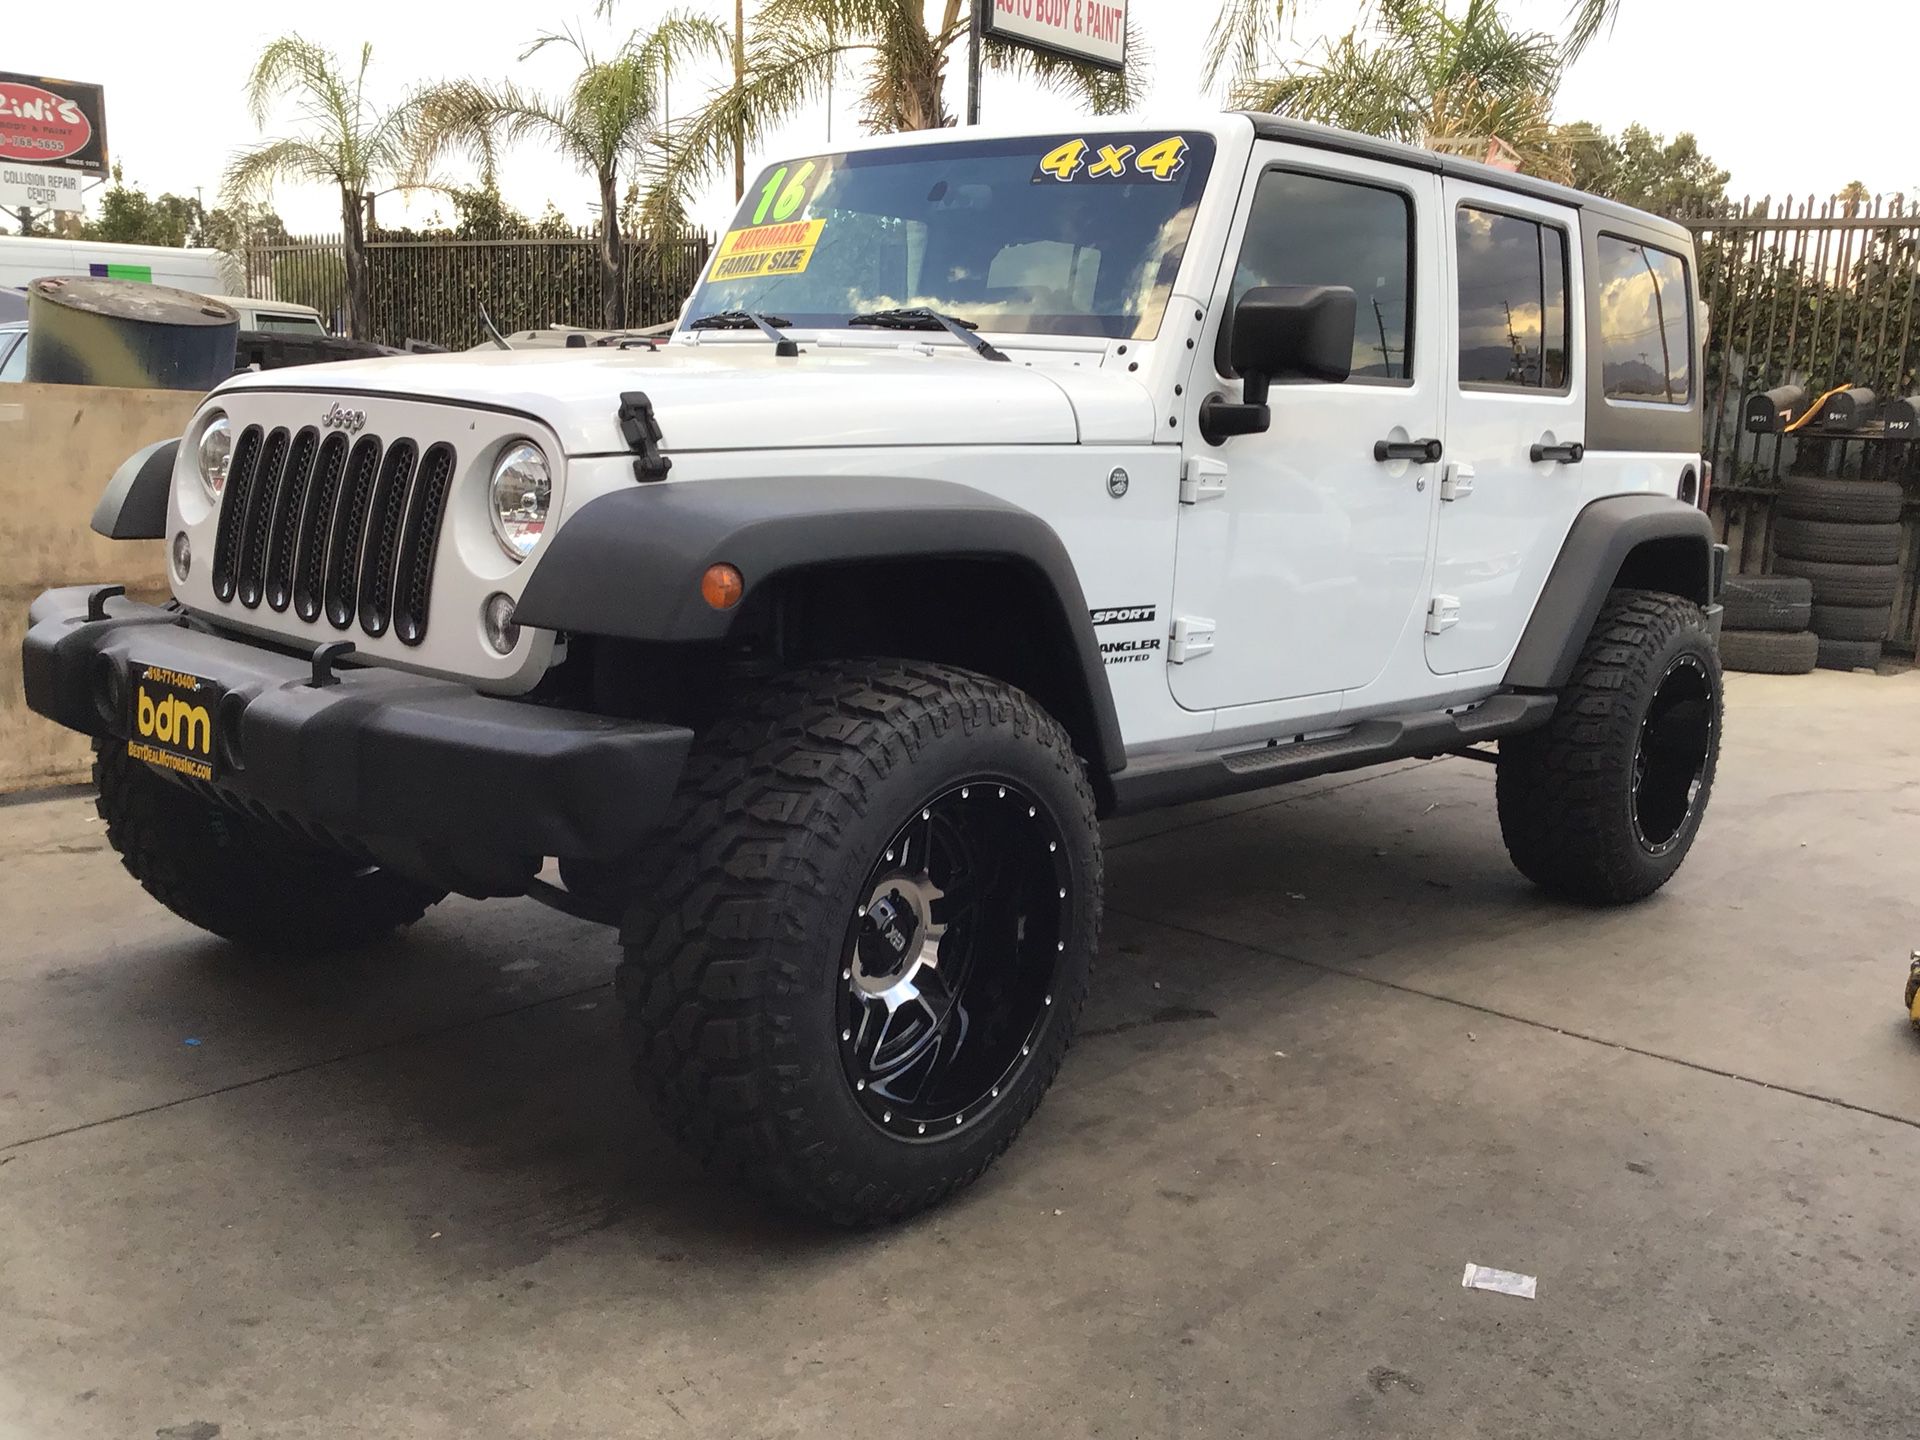 OFFERING 3” LIFT KIT, 20x12 inch Wheels And 35 Inch Tires For 2007 -Up Jeep  Wrangler JK 4x4 for Sale in Los Angeles, CA - OfferUp